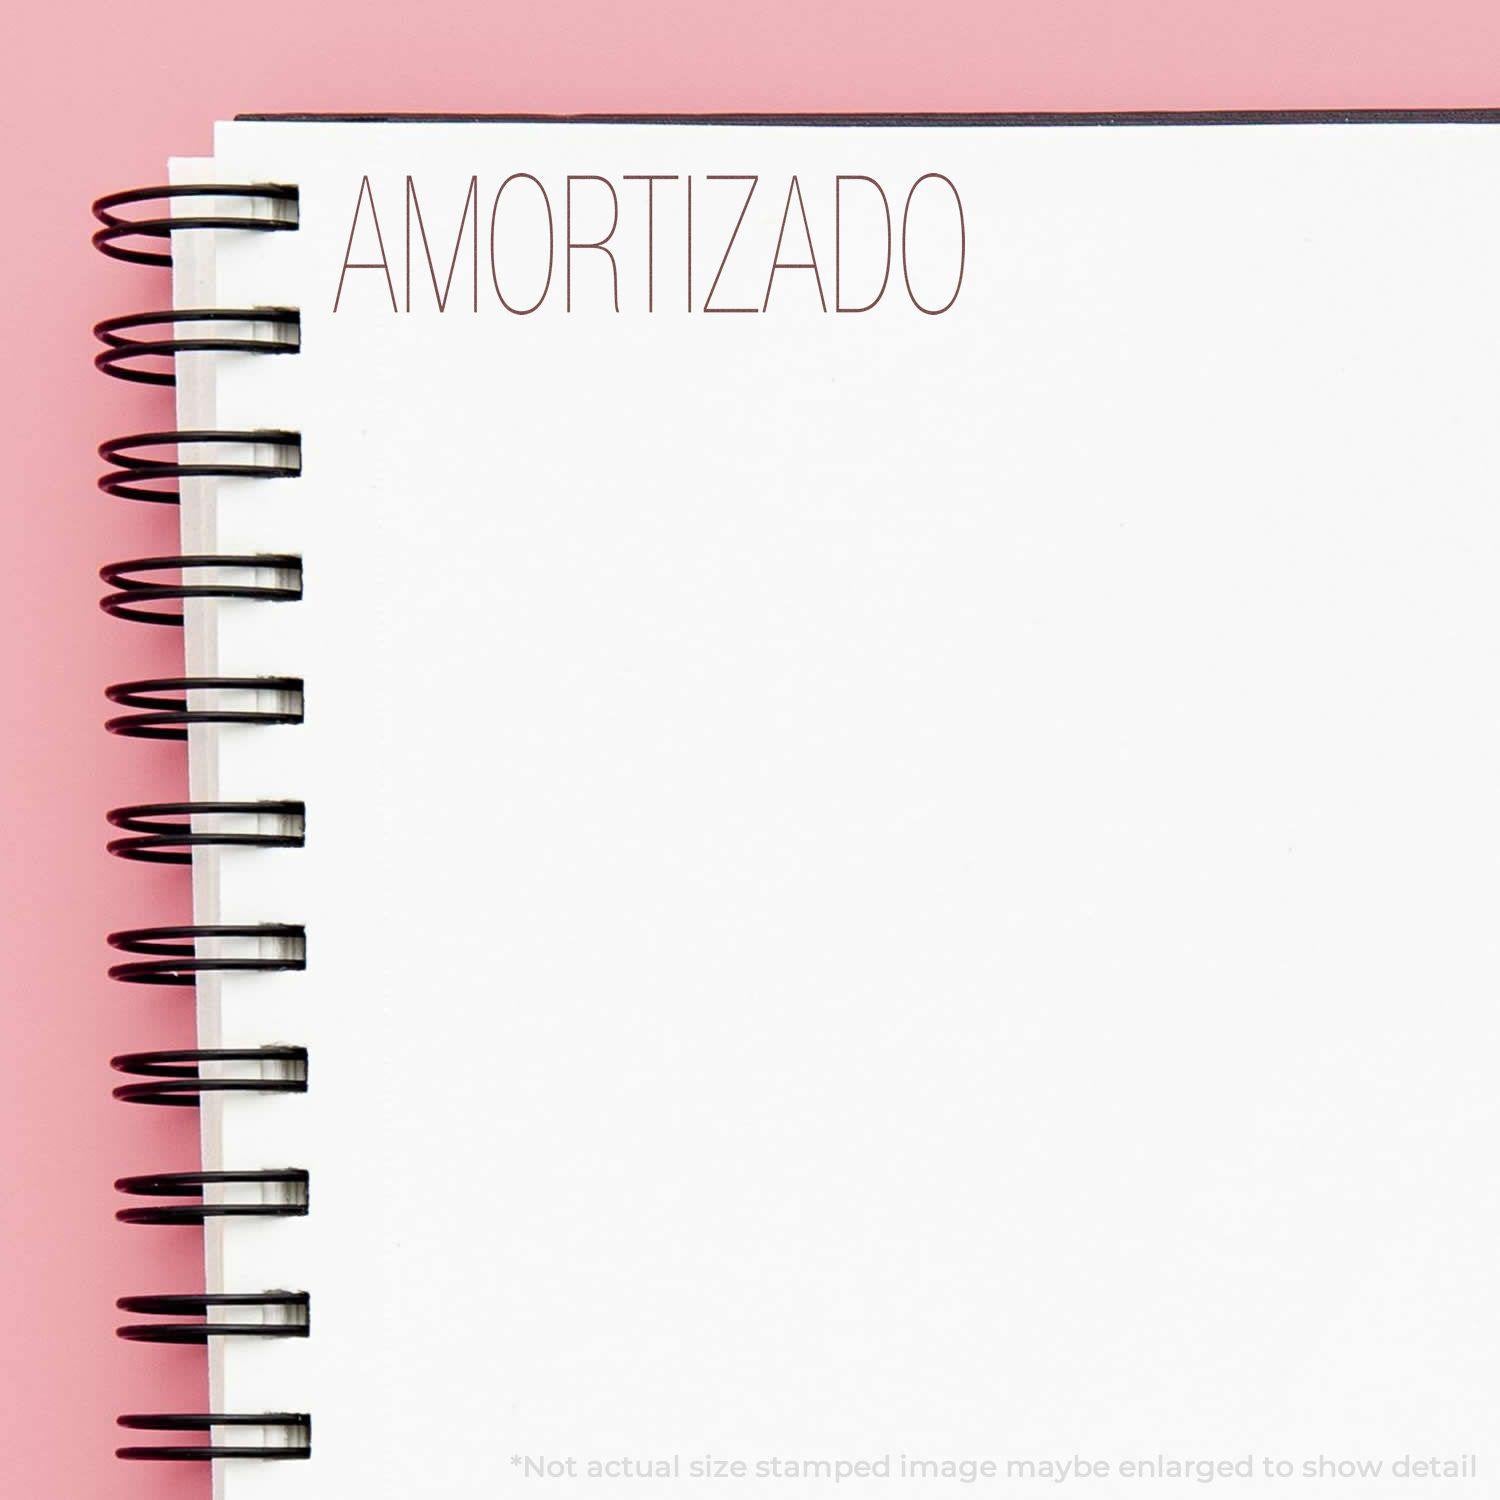 A self-inking stamp with a stamped image showing how the text "AMORTIZADO" is displayed after stamping.